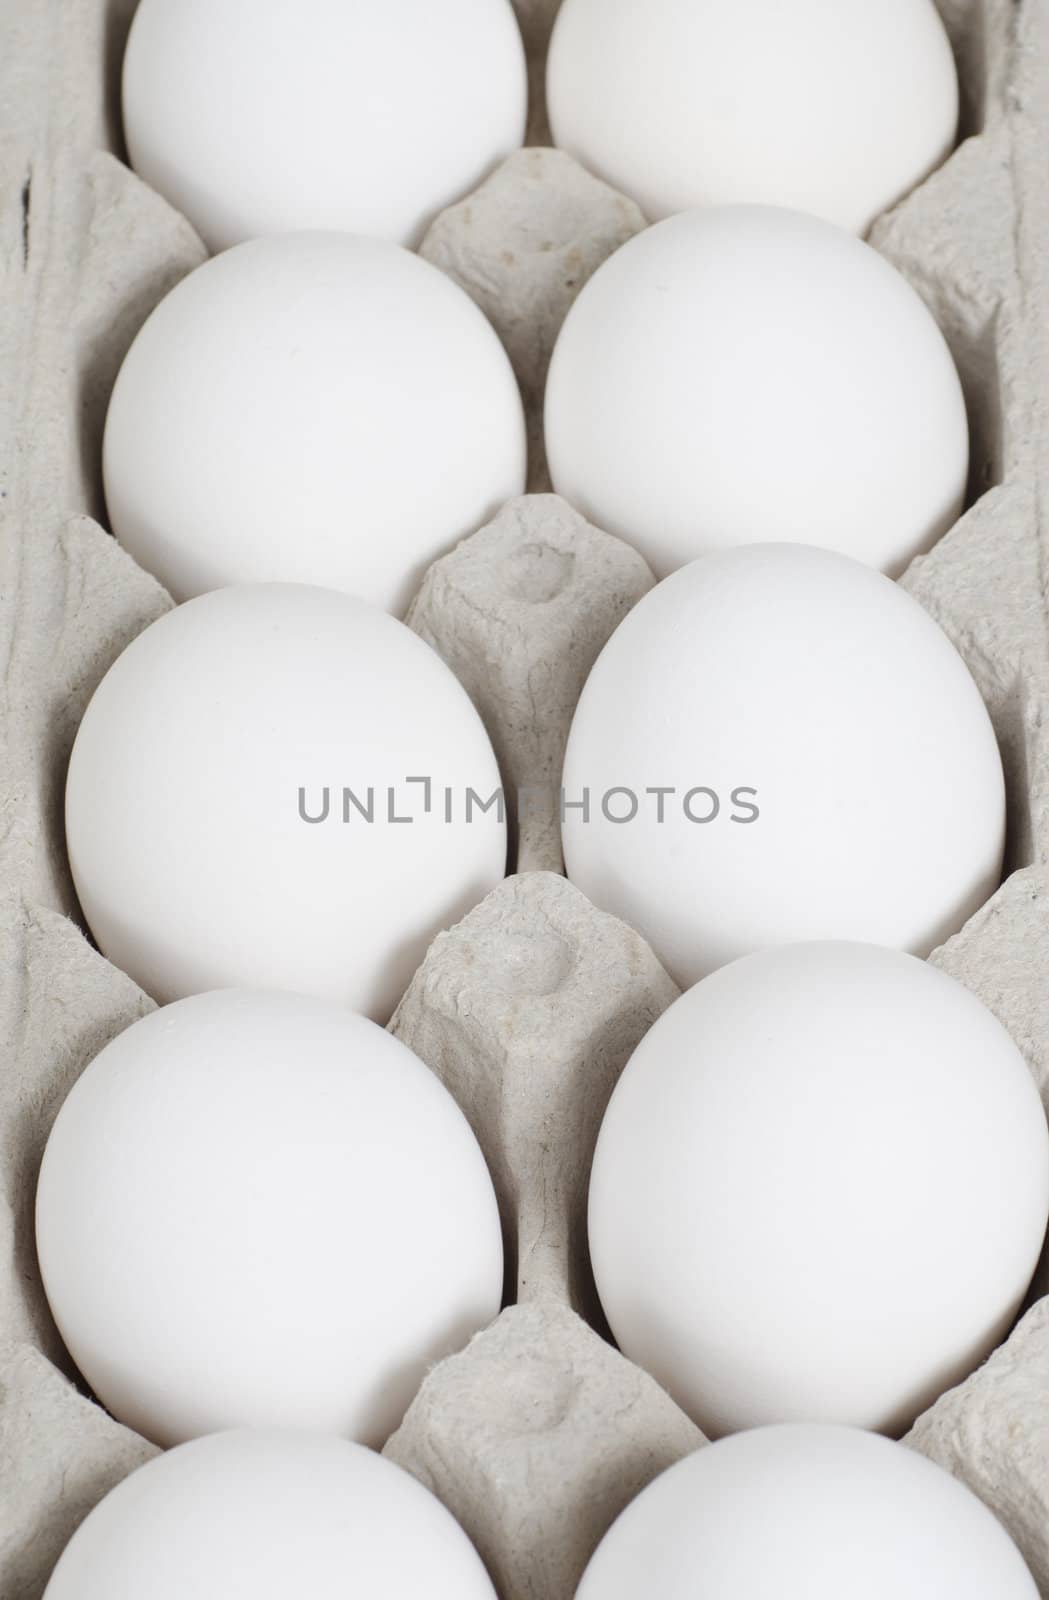 Selective focus on the middle eggs in the carton